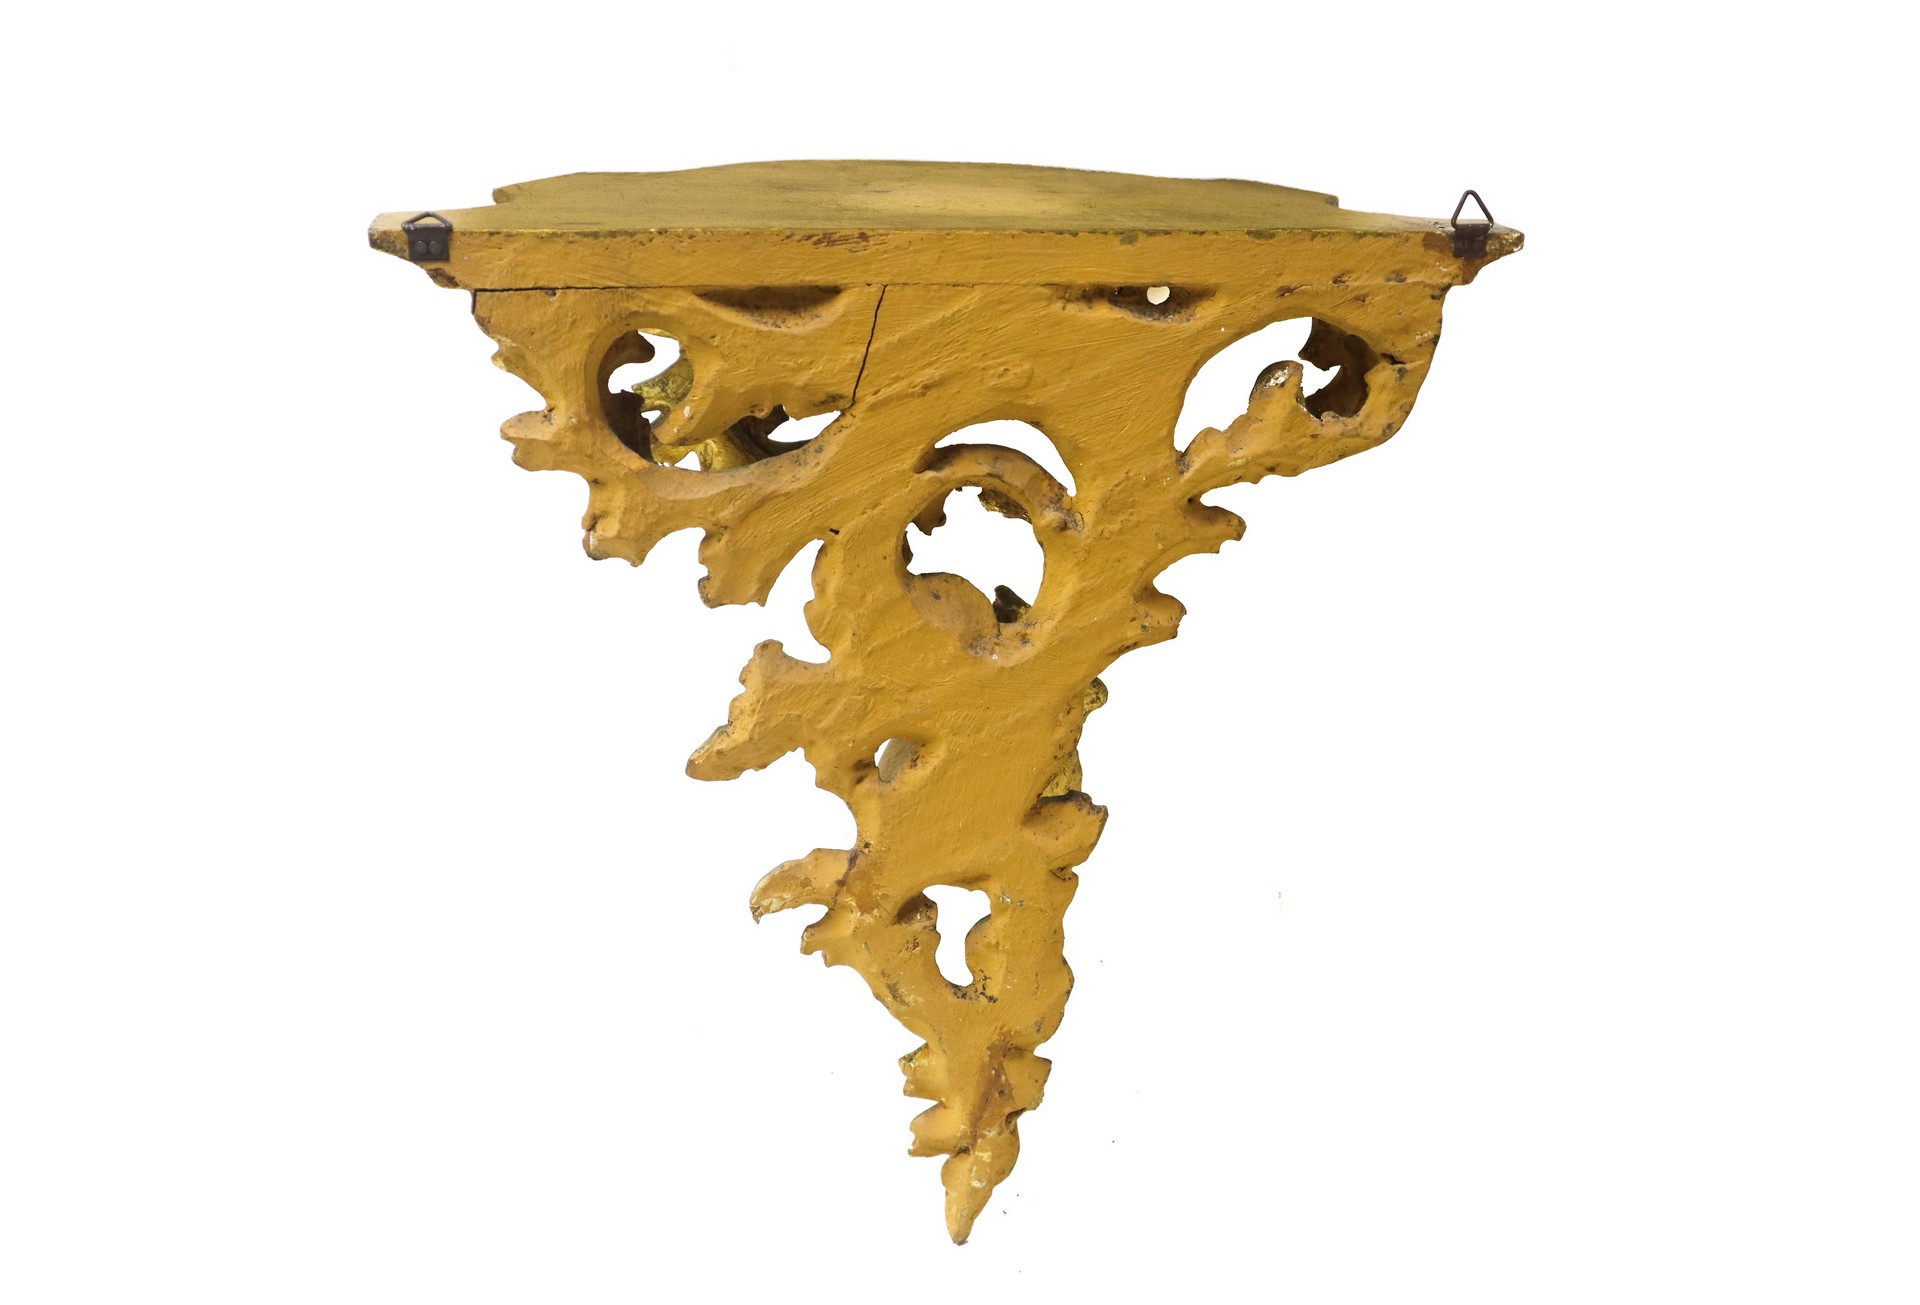 Pair of shelves in gilded wood, Early 20th century - Image 4 of 5